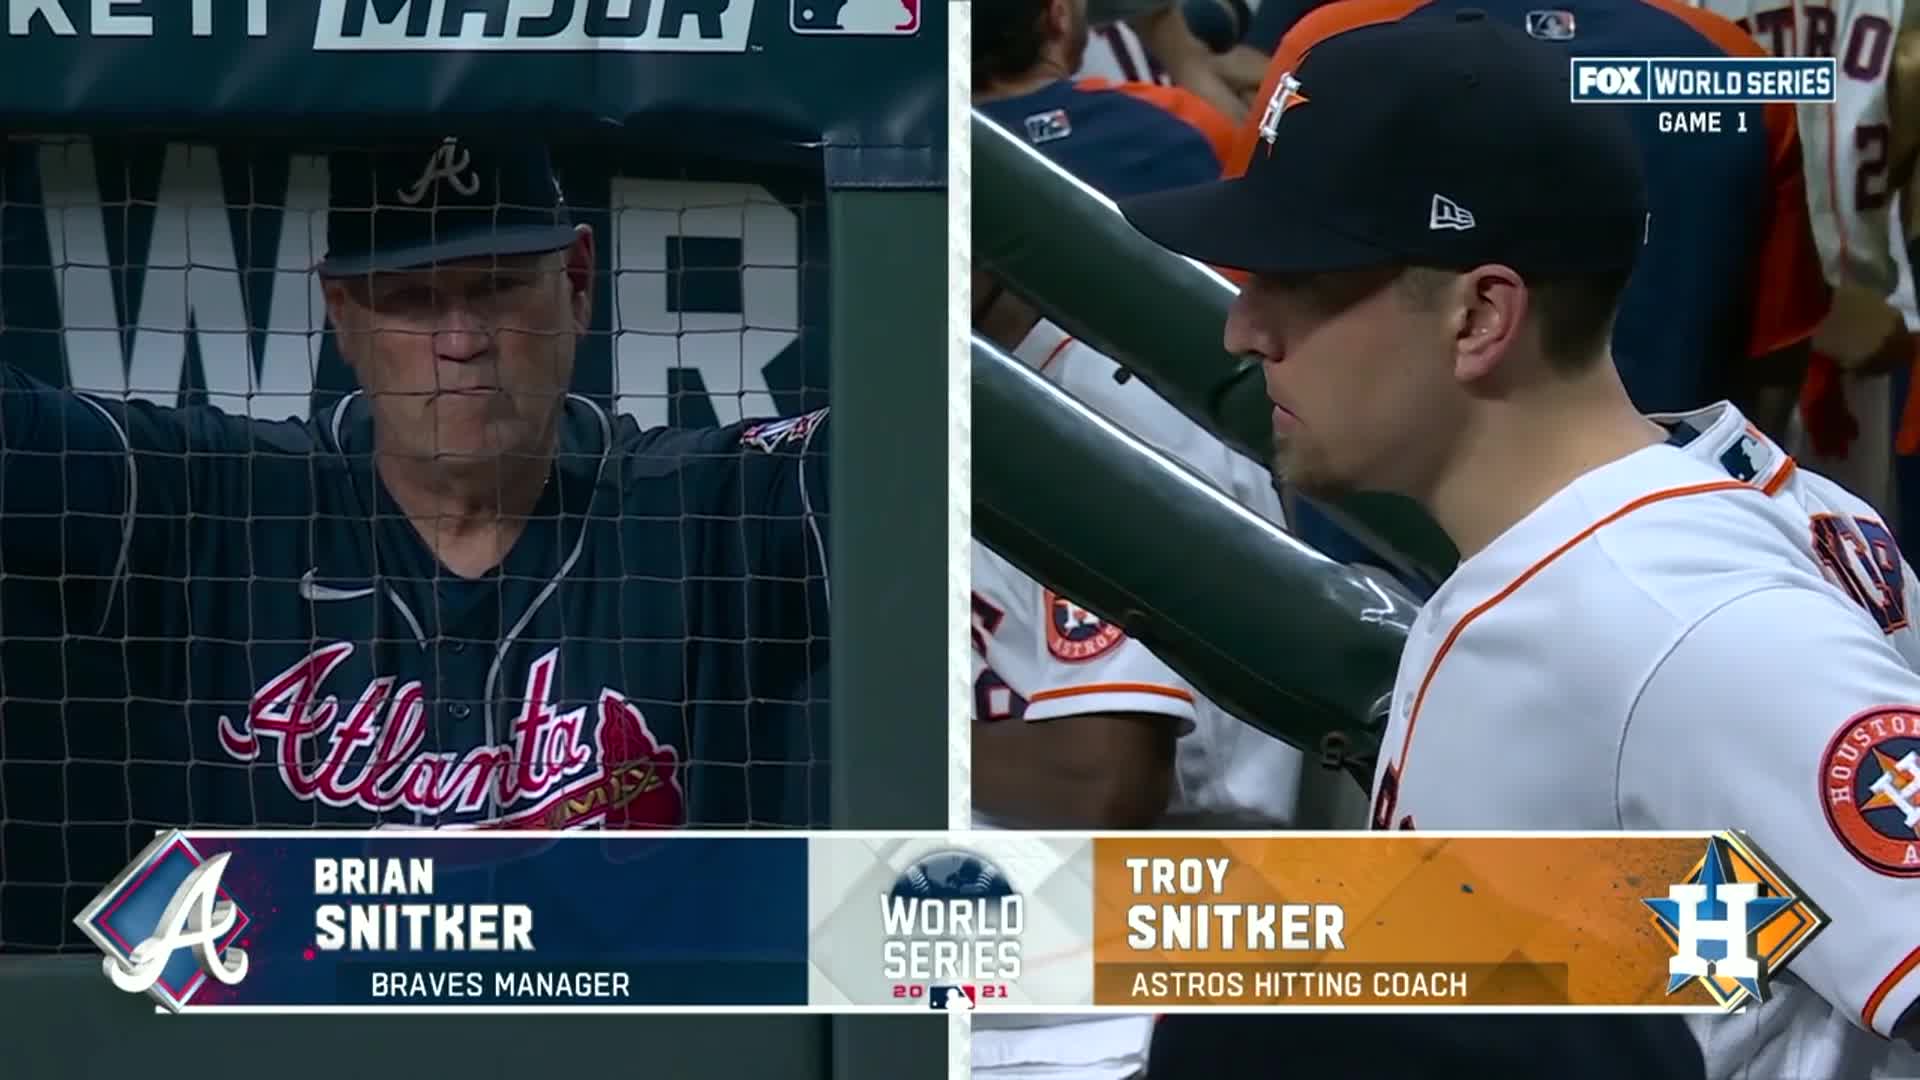 Brian Snitker's career path to manager